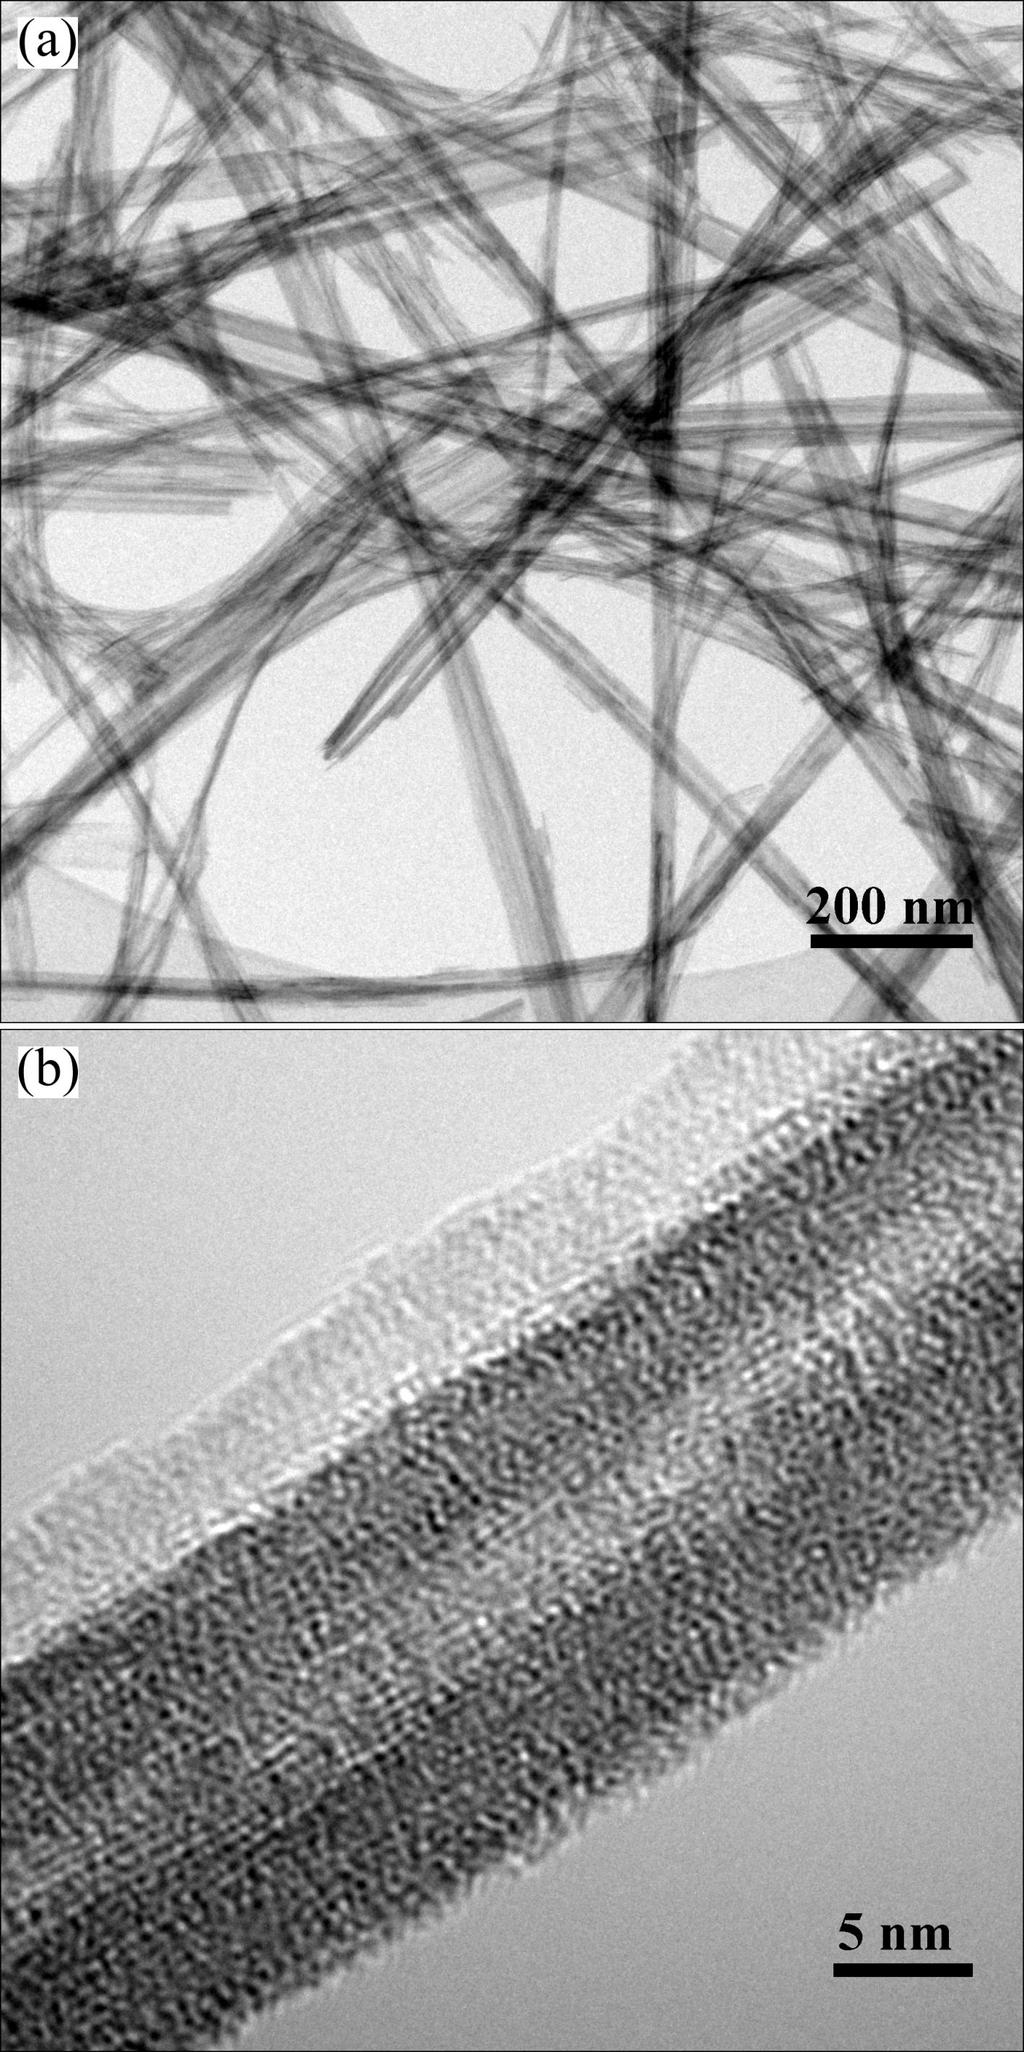 2274 Xin YAN, et al/trans. Nonferrous Met. Soc. China 25(2015) 2272 2278 and pointed out that the multiwall spiral nanotubes were transformed from the uneven sheets for the asymmetrical environment.